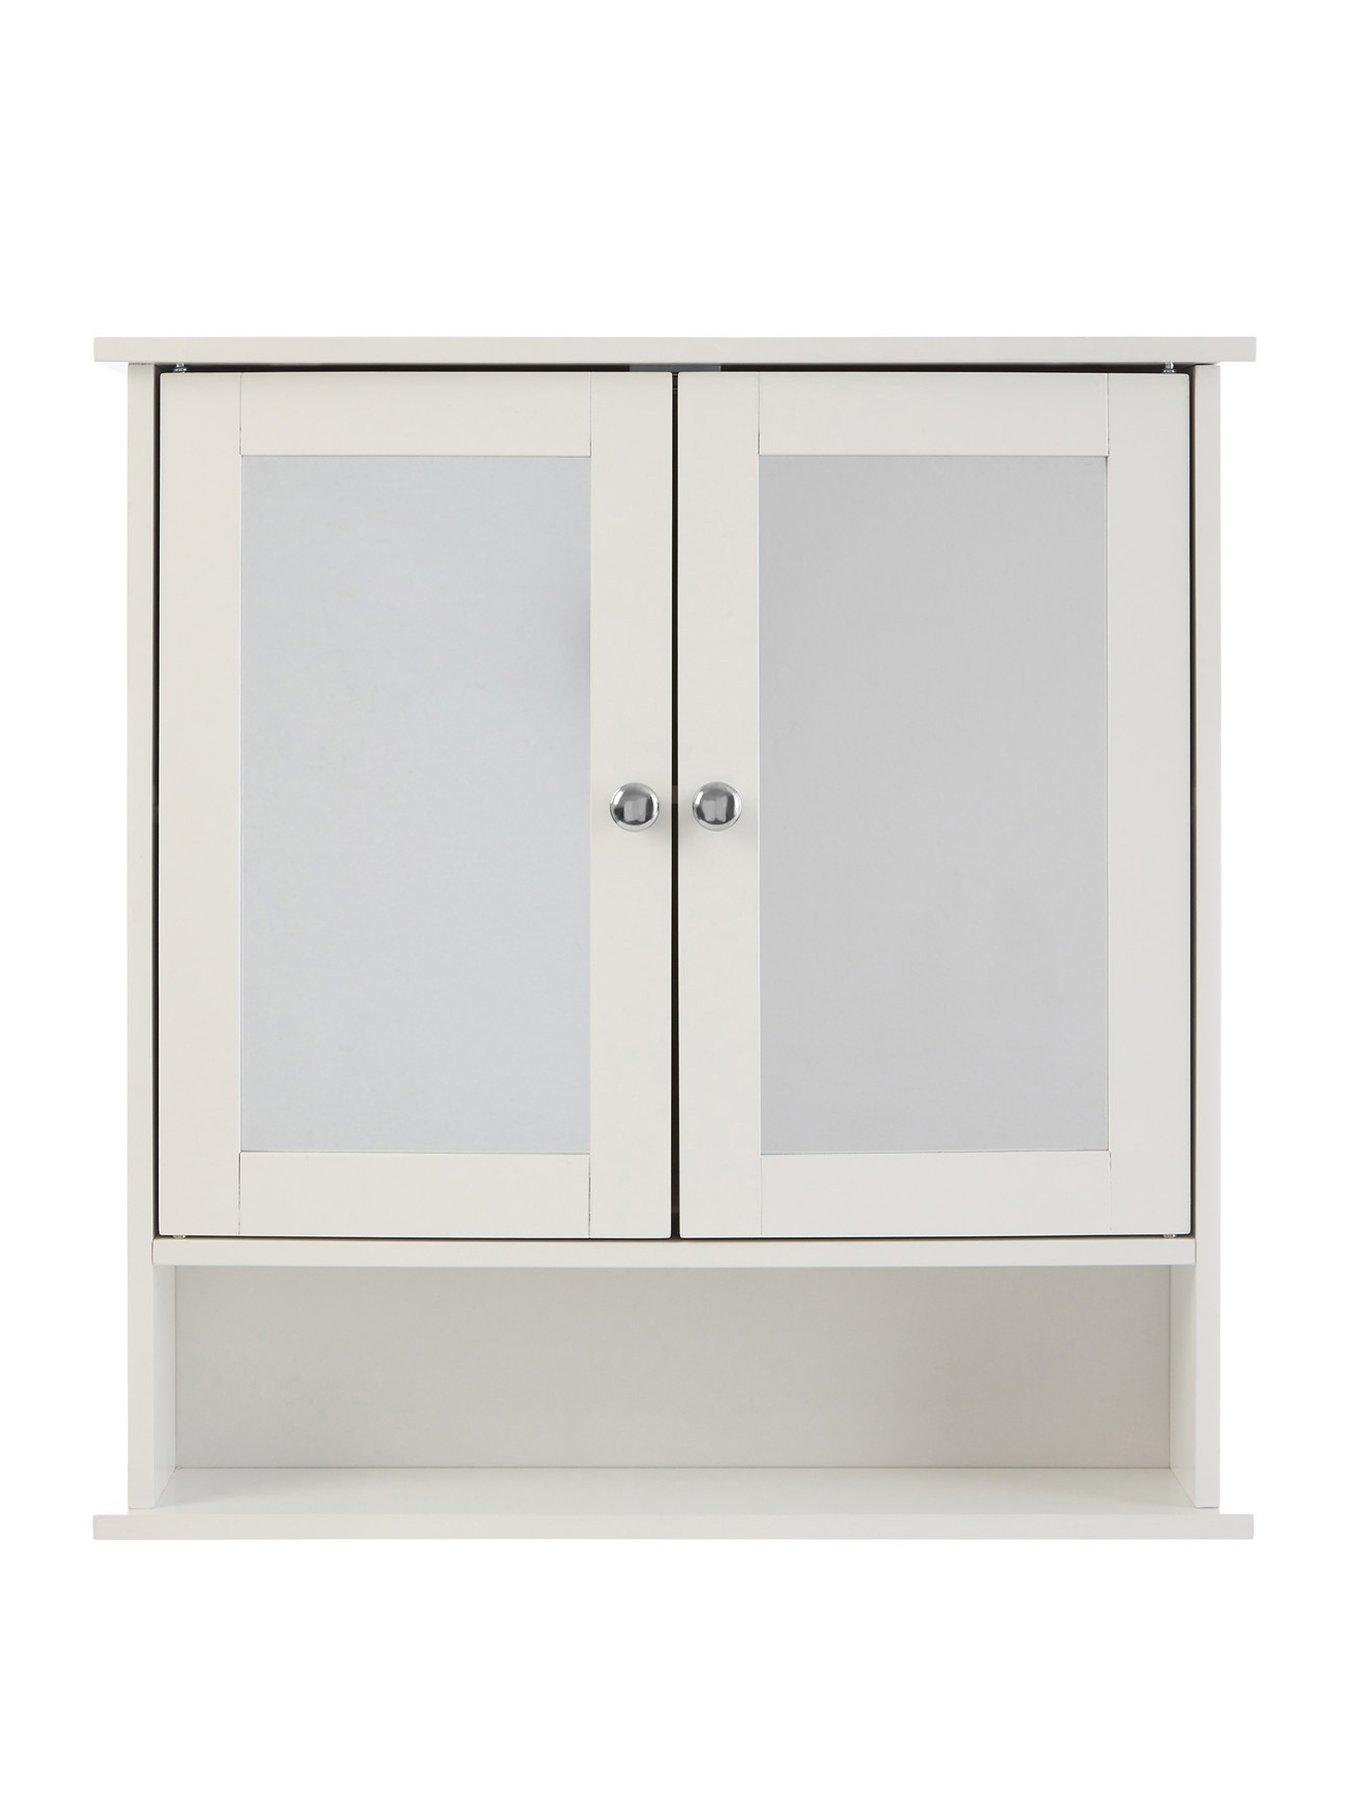 Premier Housewares Bathroom Cabinet with Mirrored Door and 3 Compartments White 58 x 46 x 20 cm